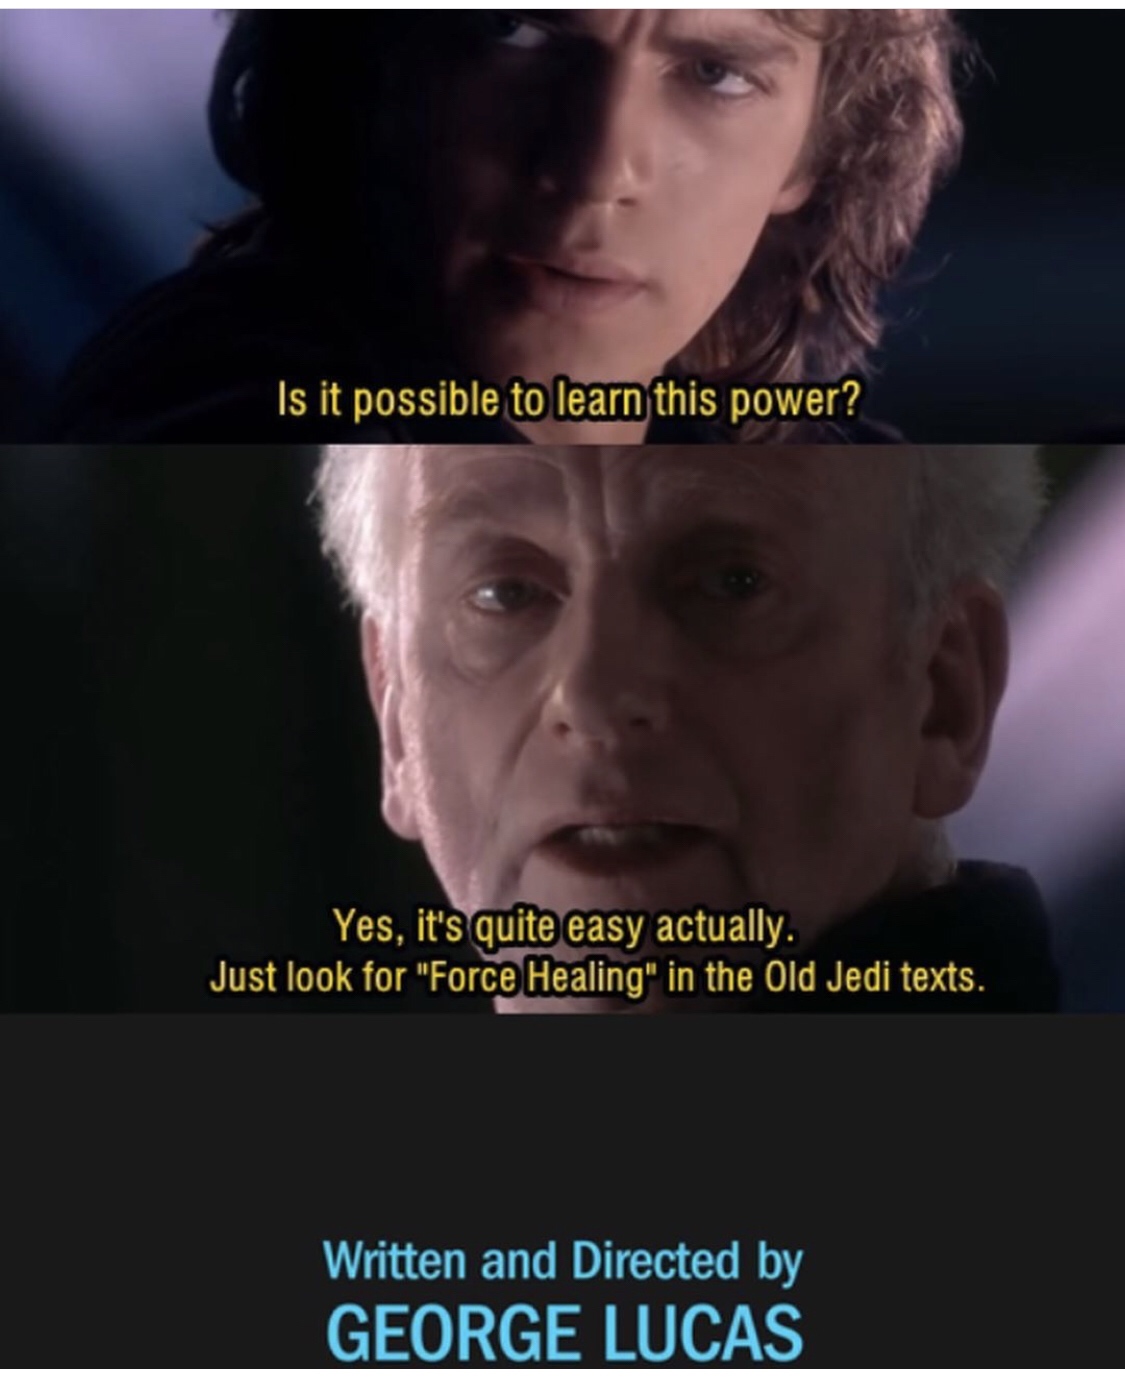 palpatine not from a mouse - 'Is it possible to learn this power? Yes, it's quite easy actually. Just look for "Force Healing" in the Old Jedi texts. Written and Directed by George Lucas